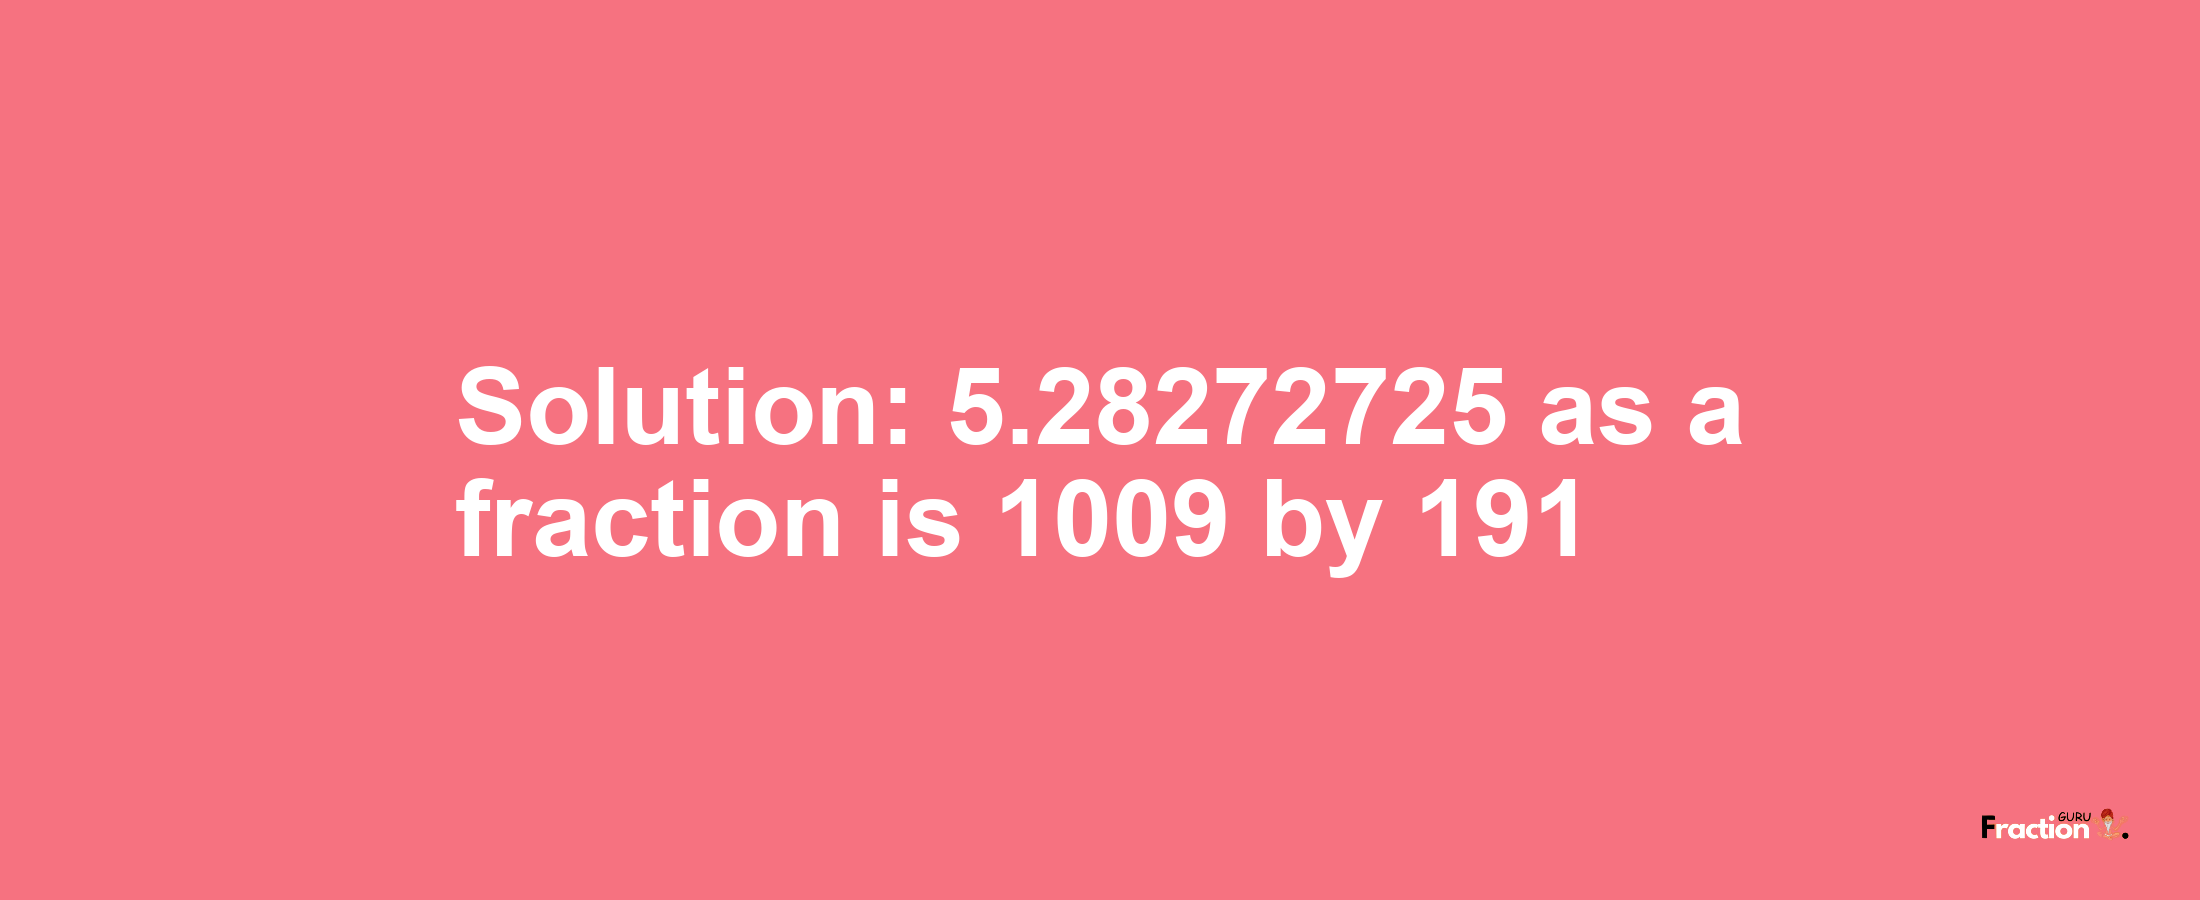 Solution:5.28272725 as a fraction is 1009/191